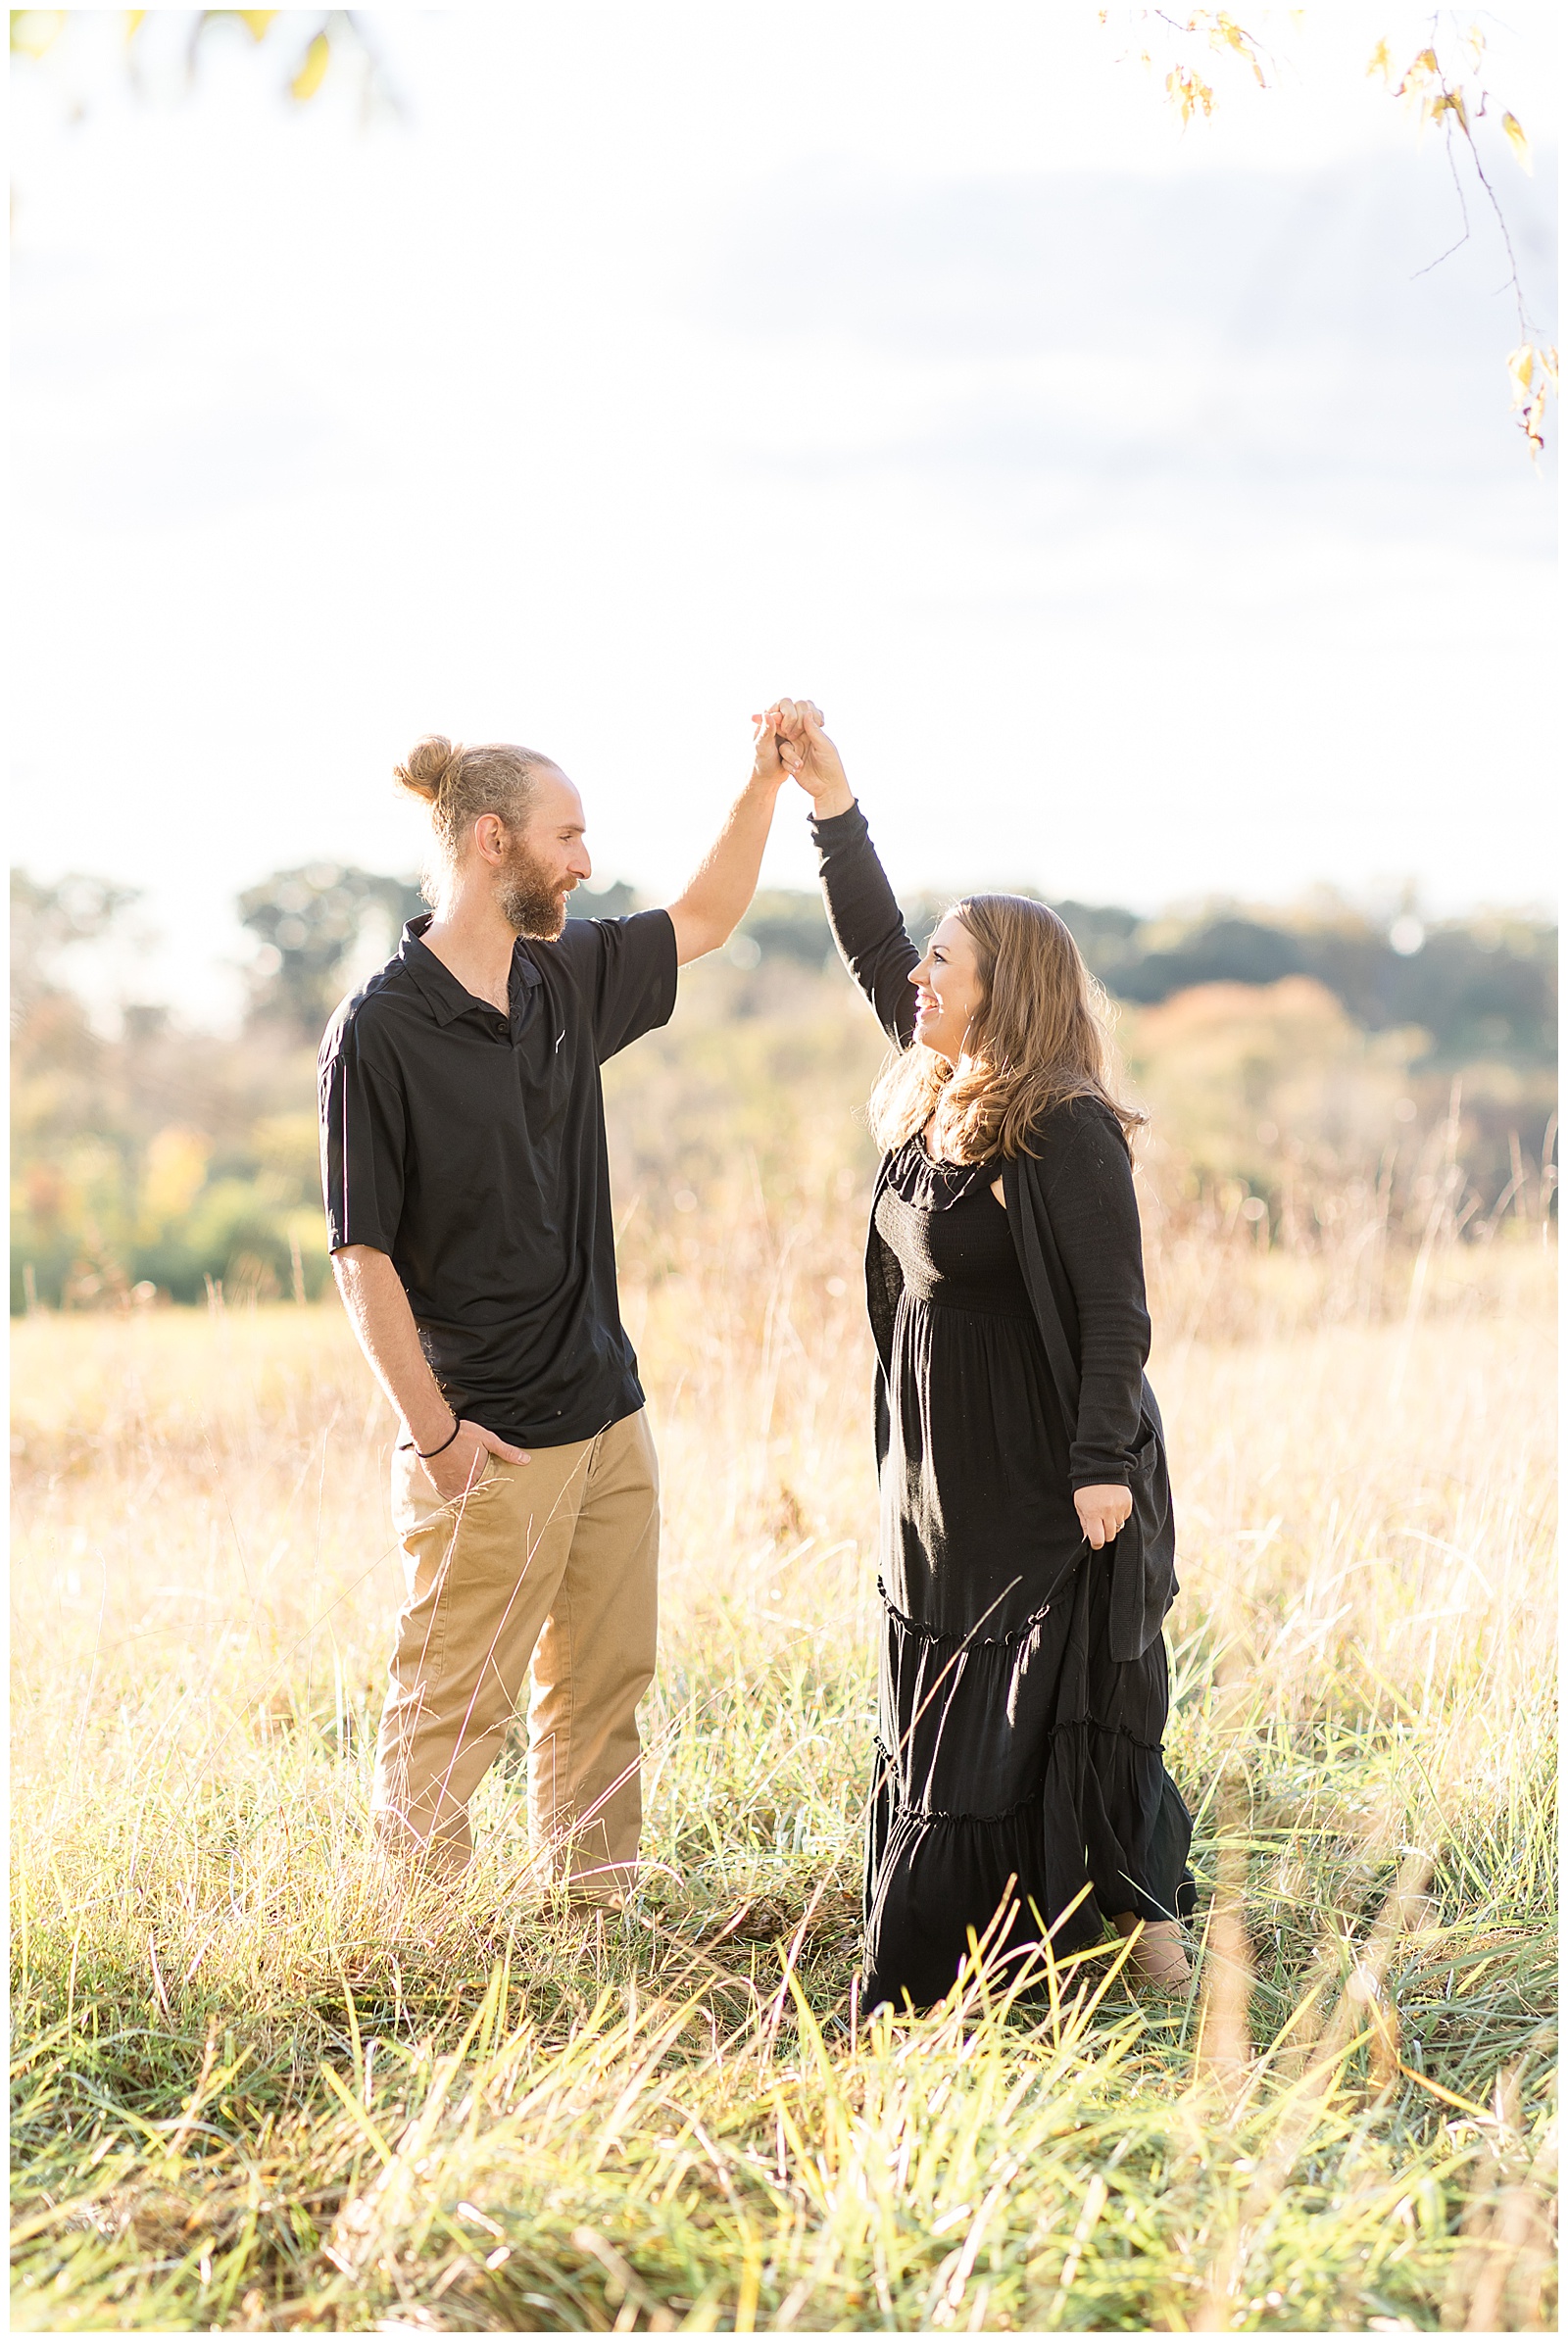 Couple dances in Richmond, VA in a field as the wife wears a black, long, dress and cardigan and her husband wears a black shirt and khaki pants as he twirls her in field.